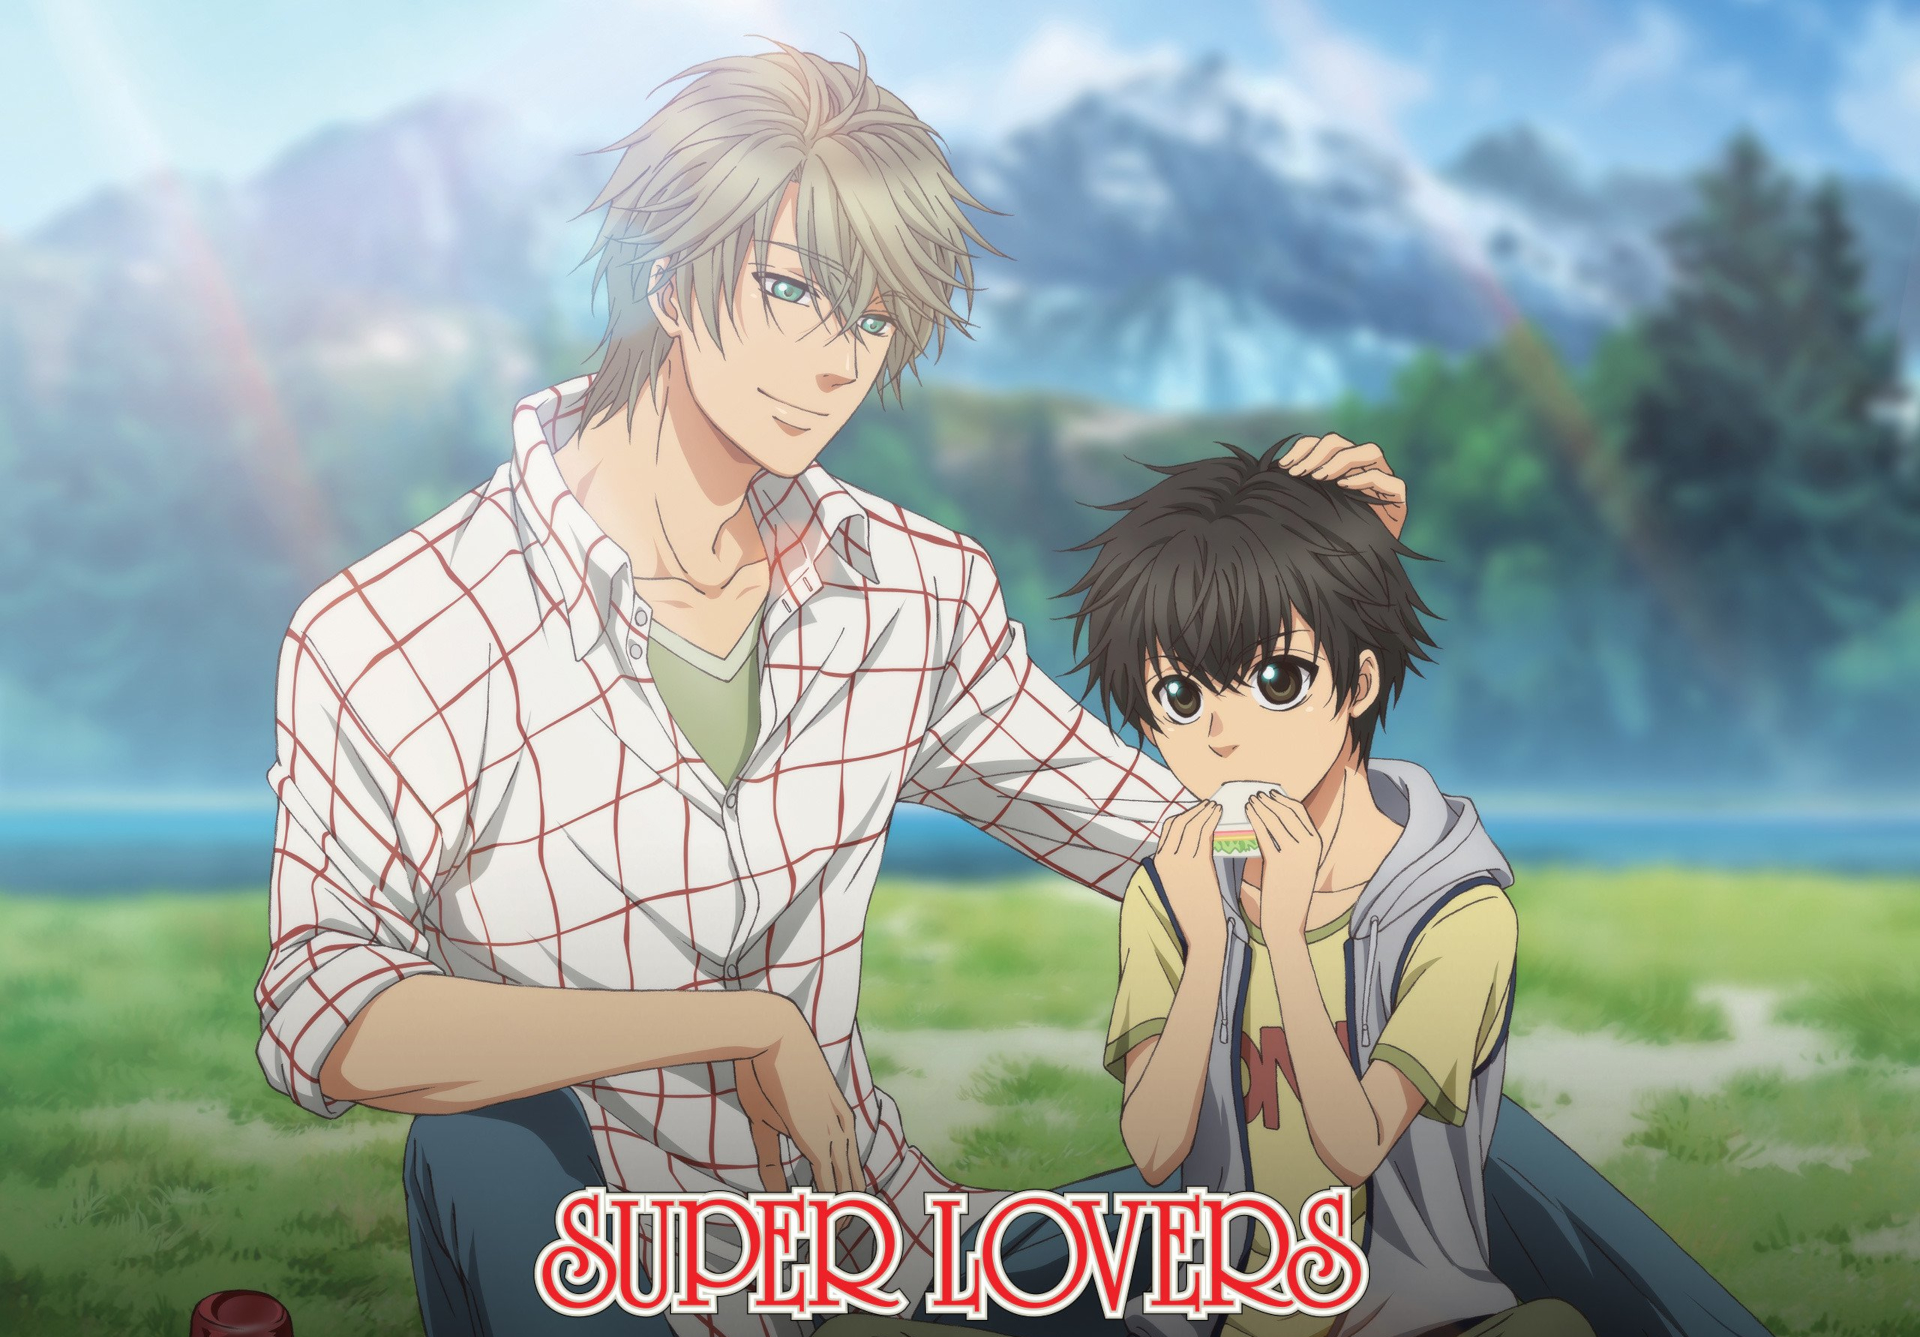 Anime Super Lovers HD Wallpaper Background Image. 